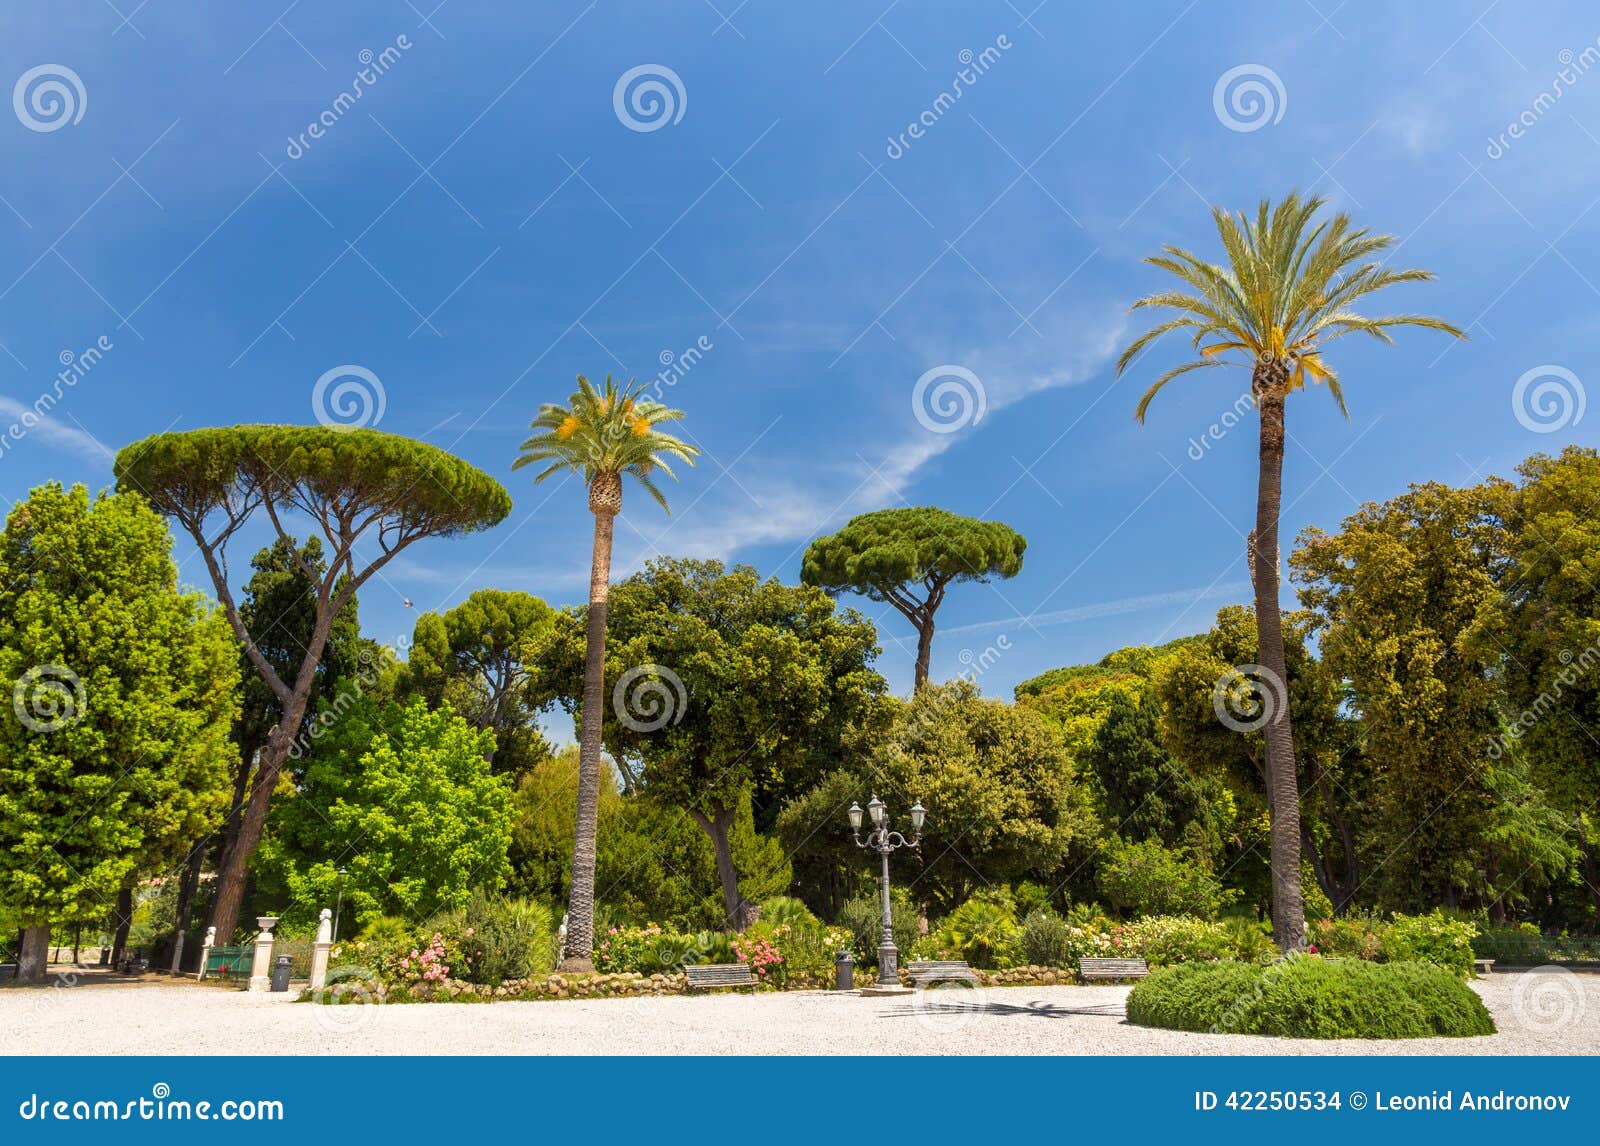 tropical trees on piazzale napoleone i in rome, italy